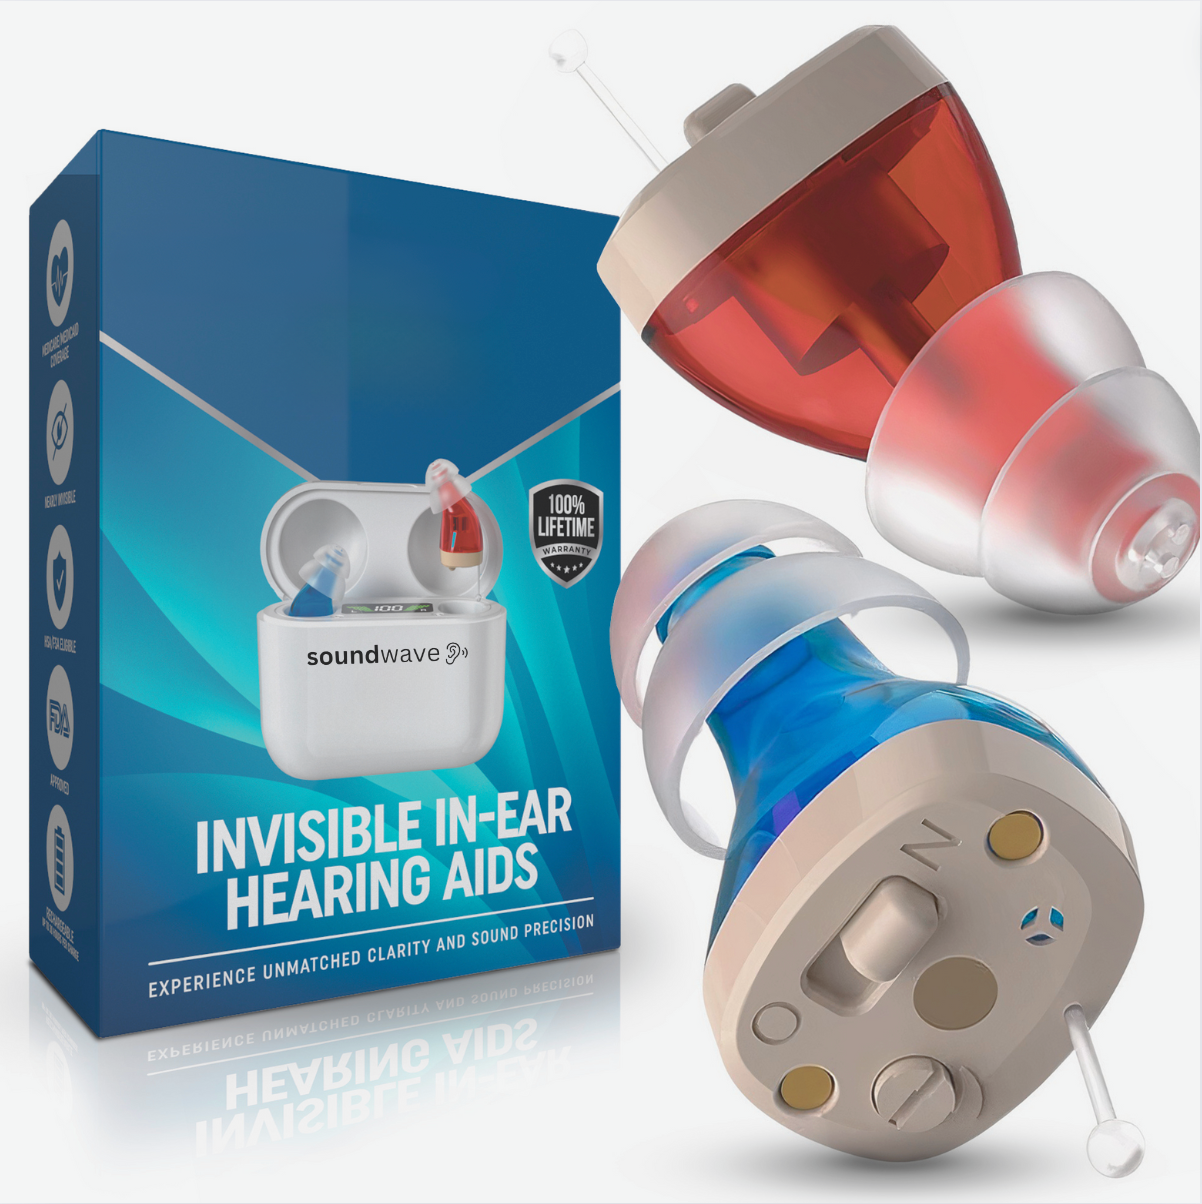 The Soundwave® Invisible Hearing Aids